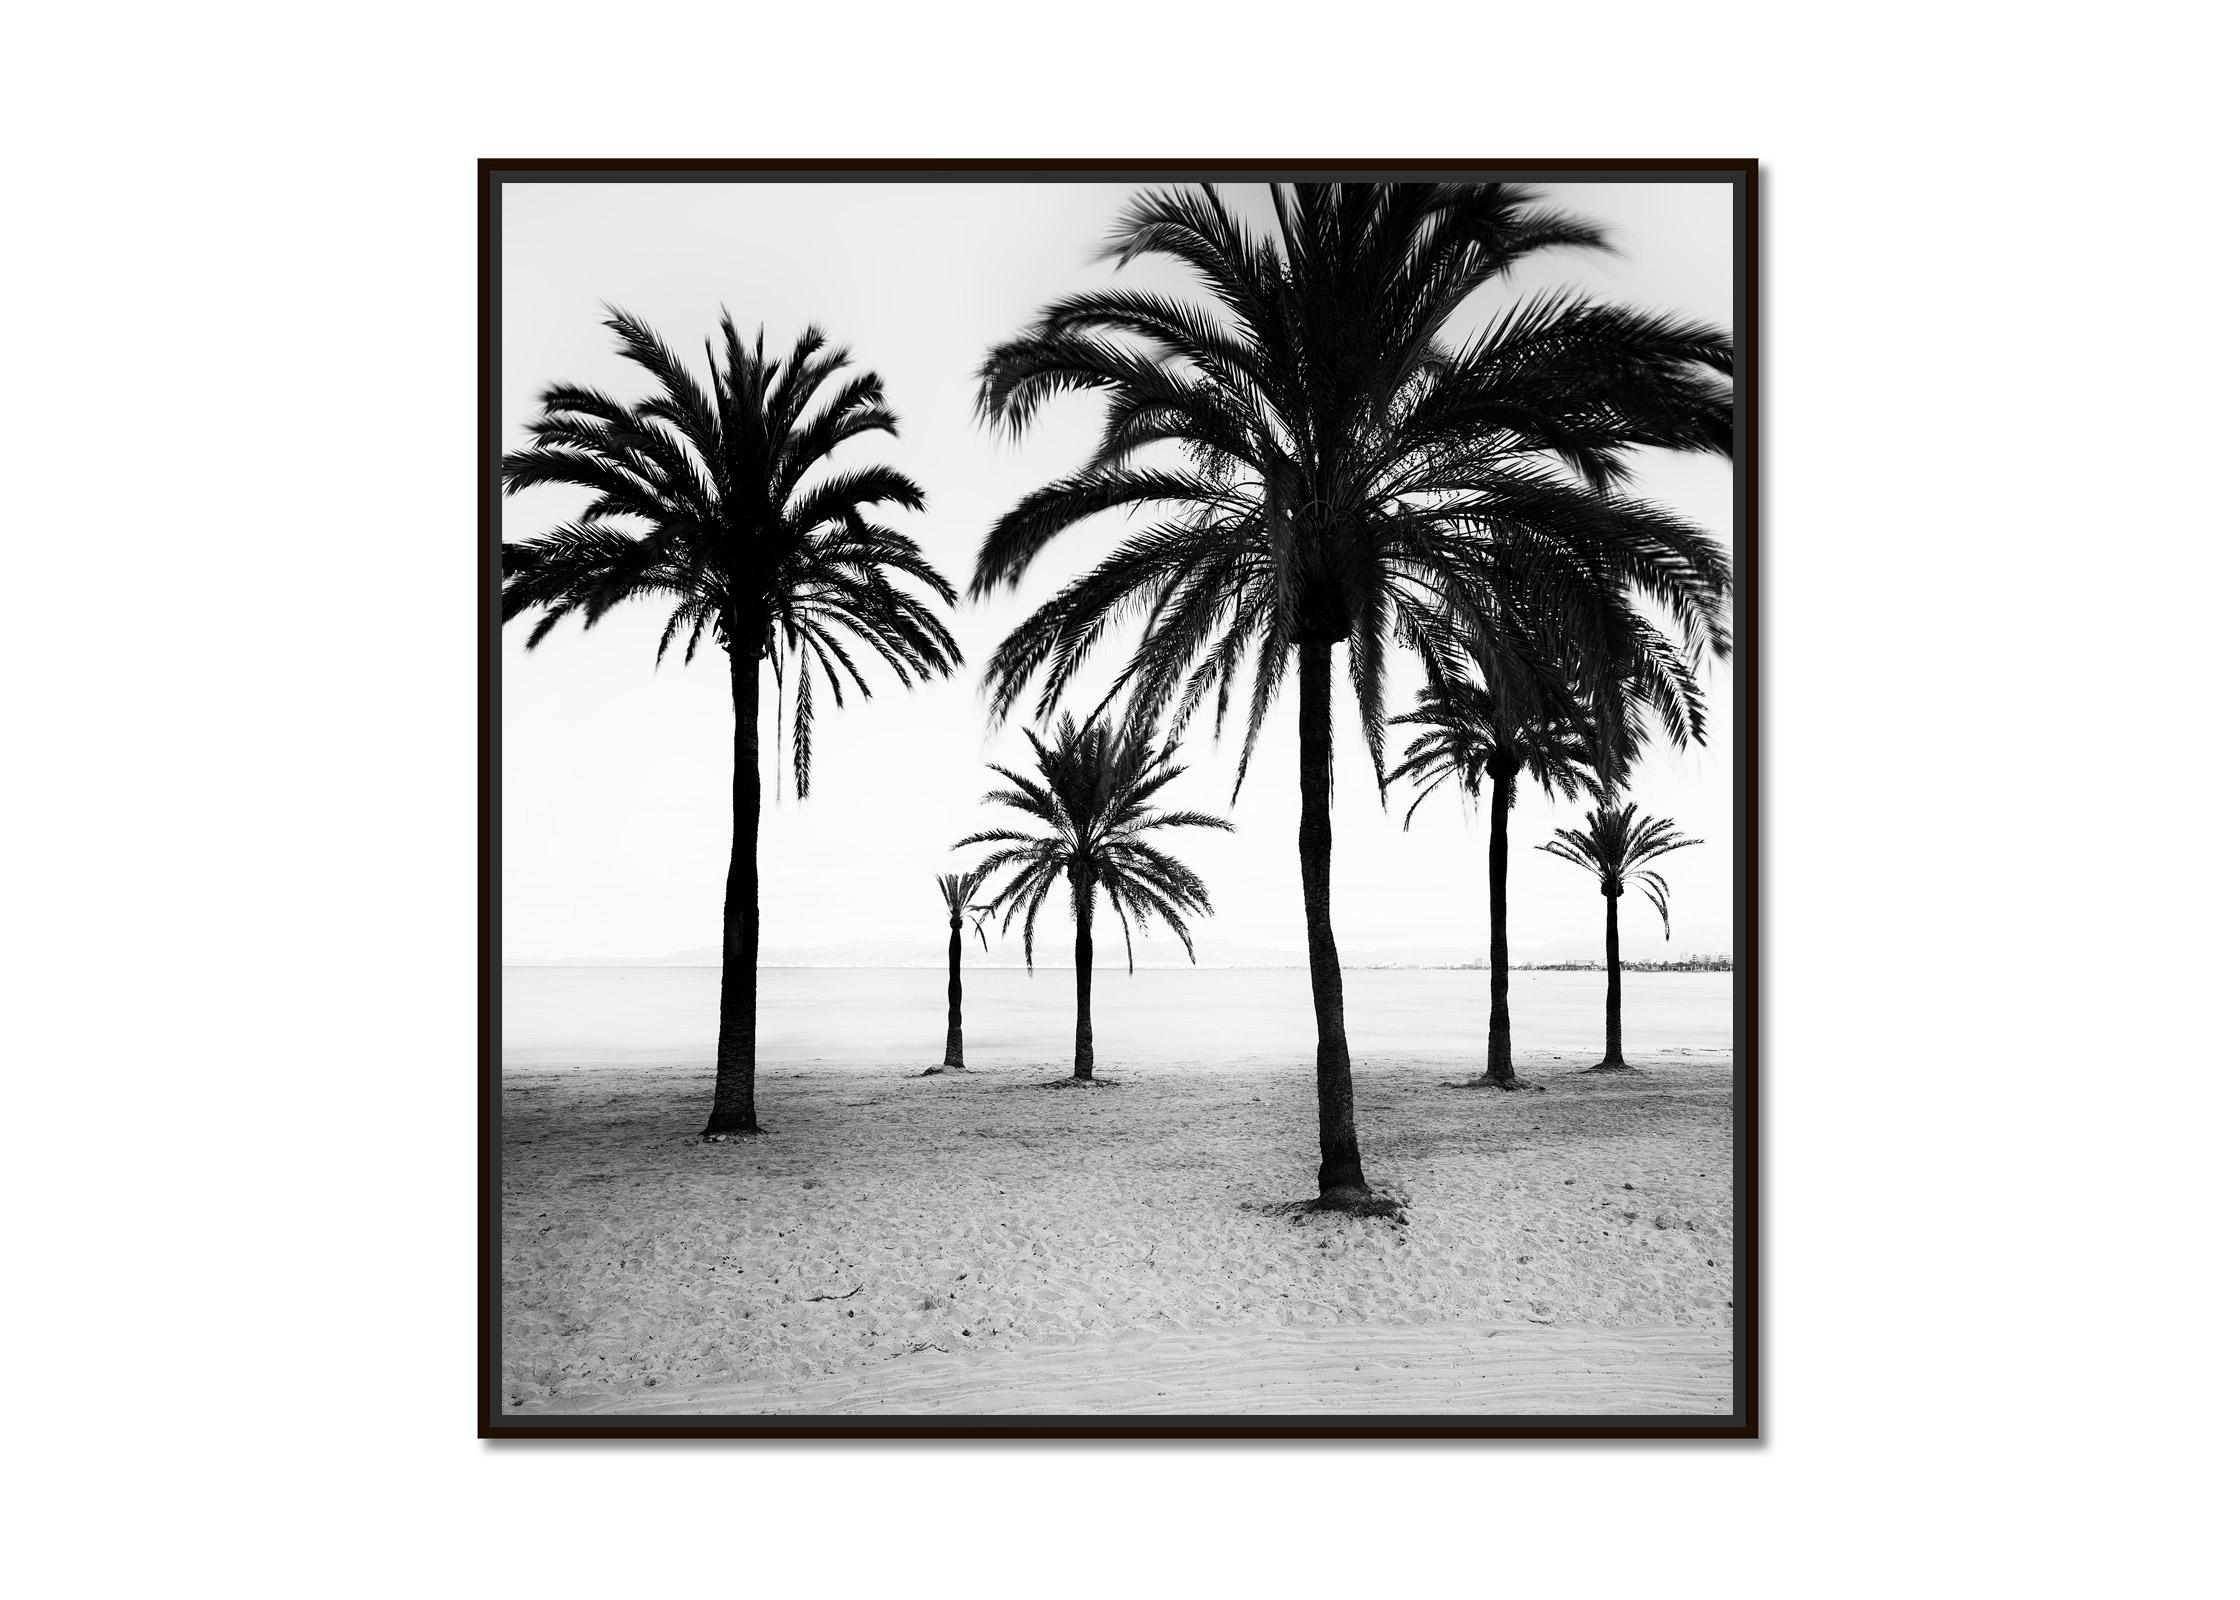 Palm Trees at the Beach, Mallorca, black and white photography, art landscape - Photograph by Gerald Berghammer